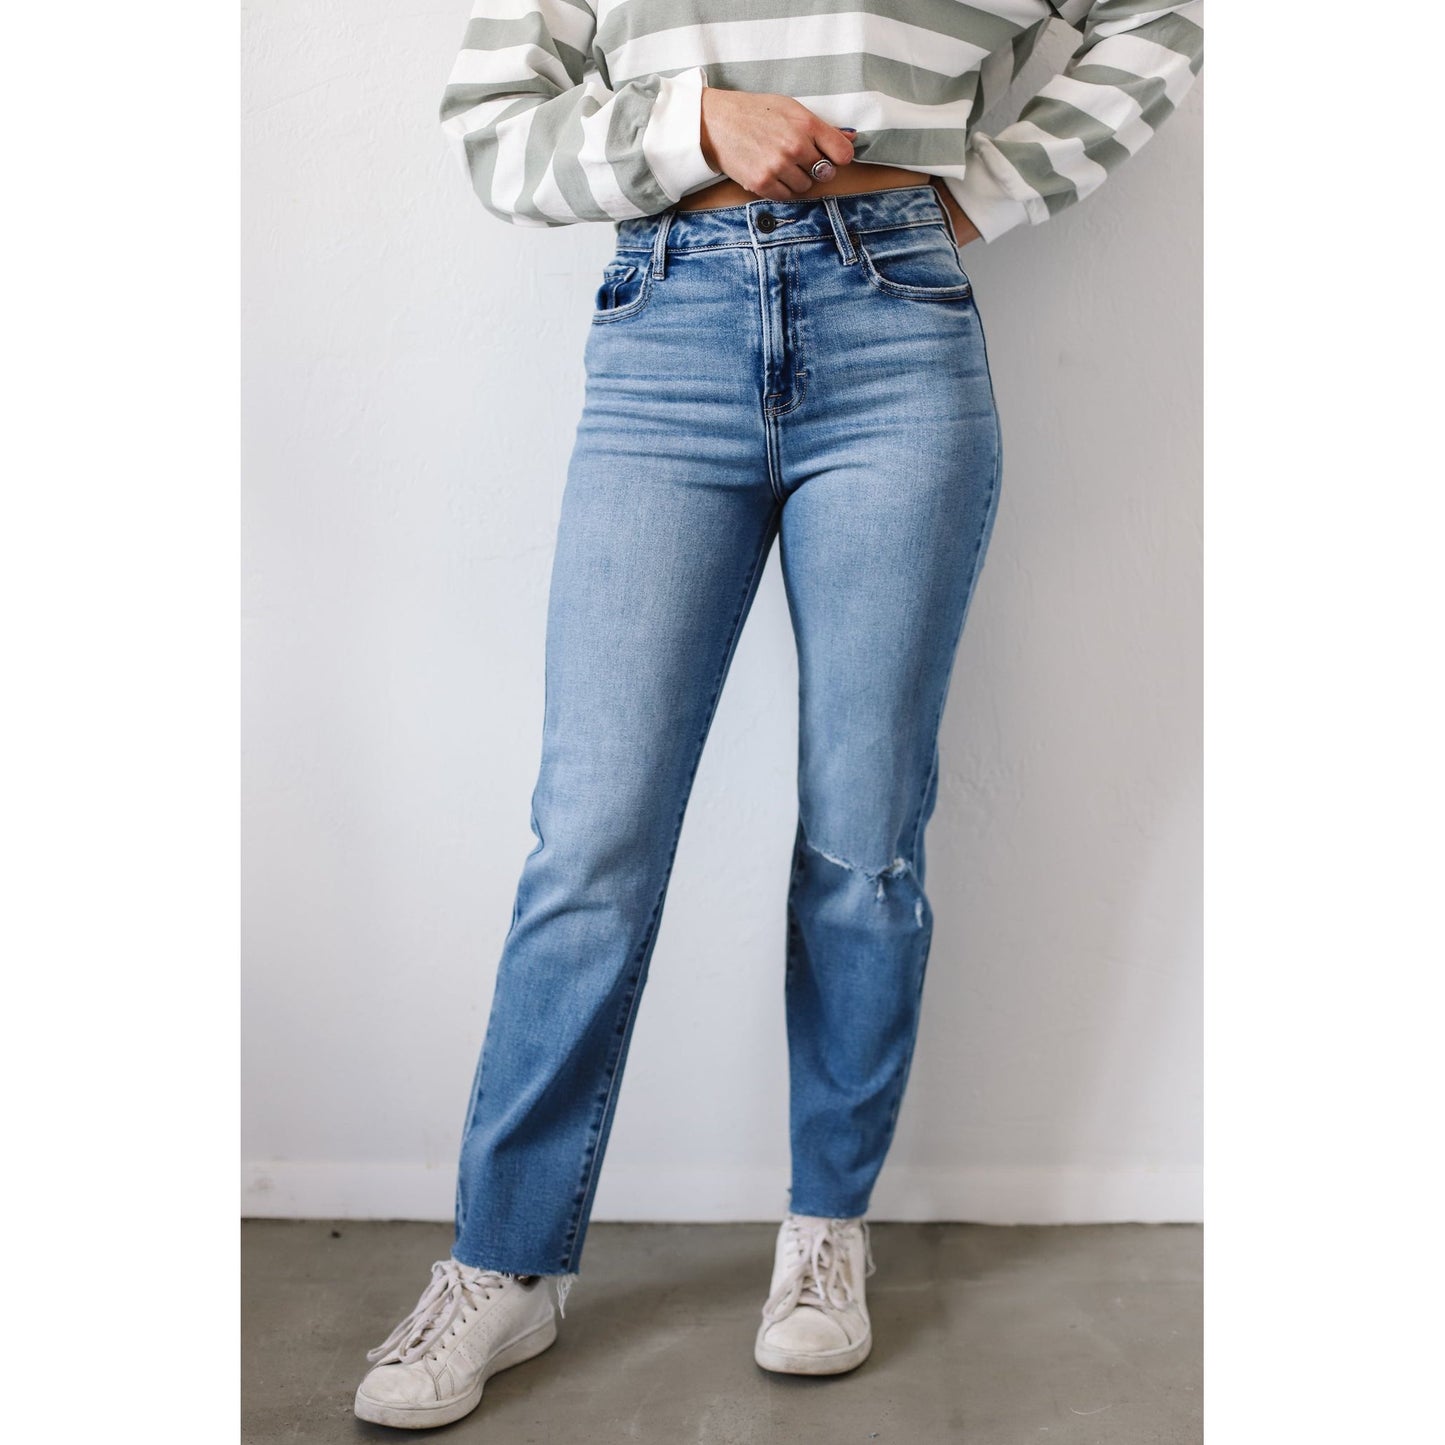 Hidden Tracey Jeans - Style 1